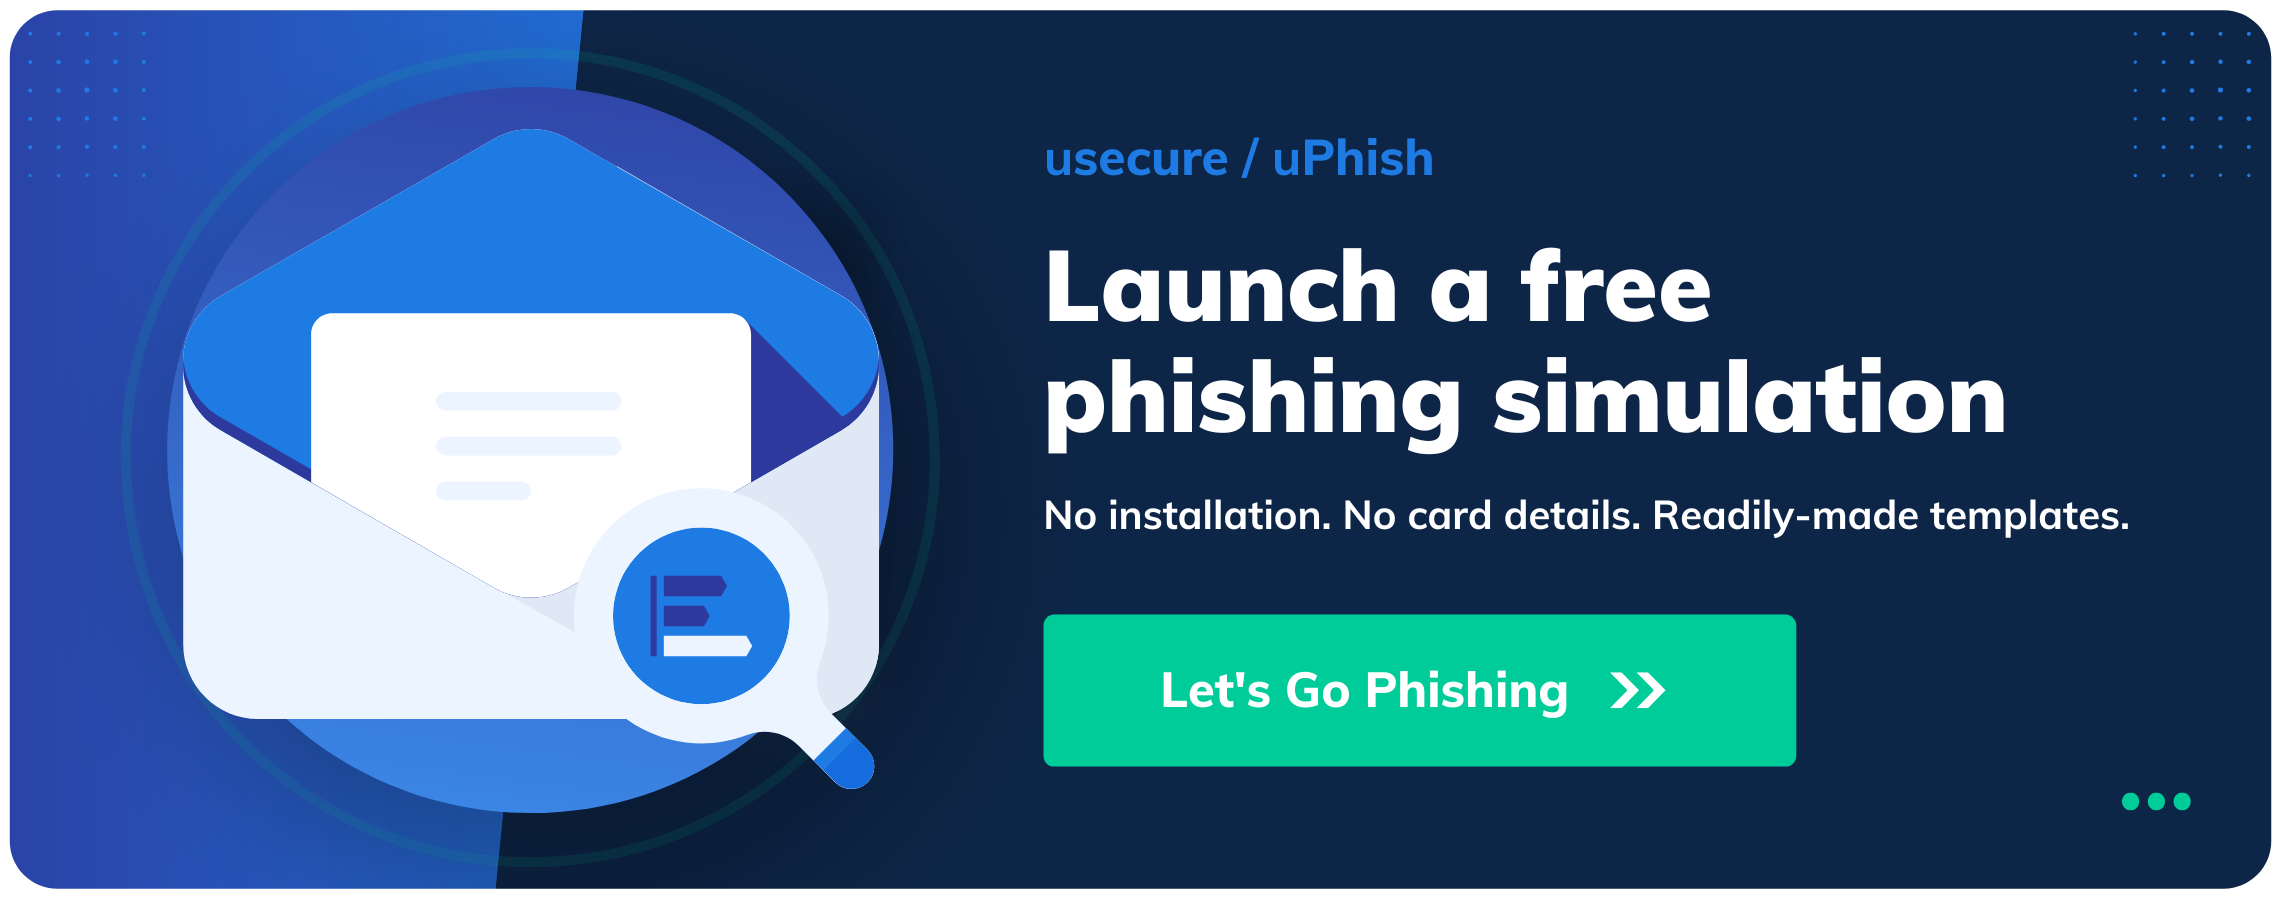 Blog • Ring customers targeted in a broad phishing scam.